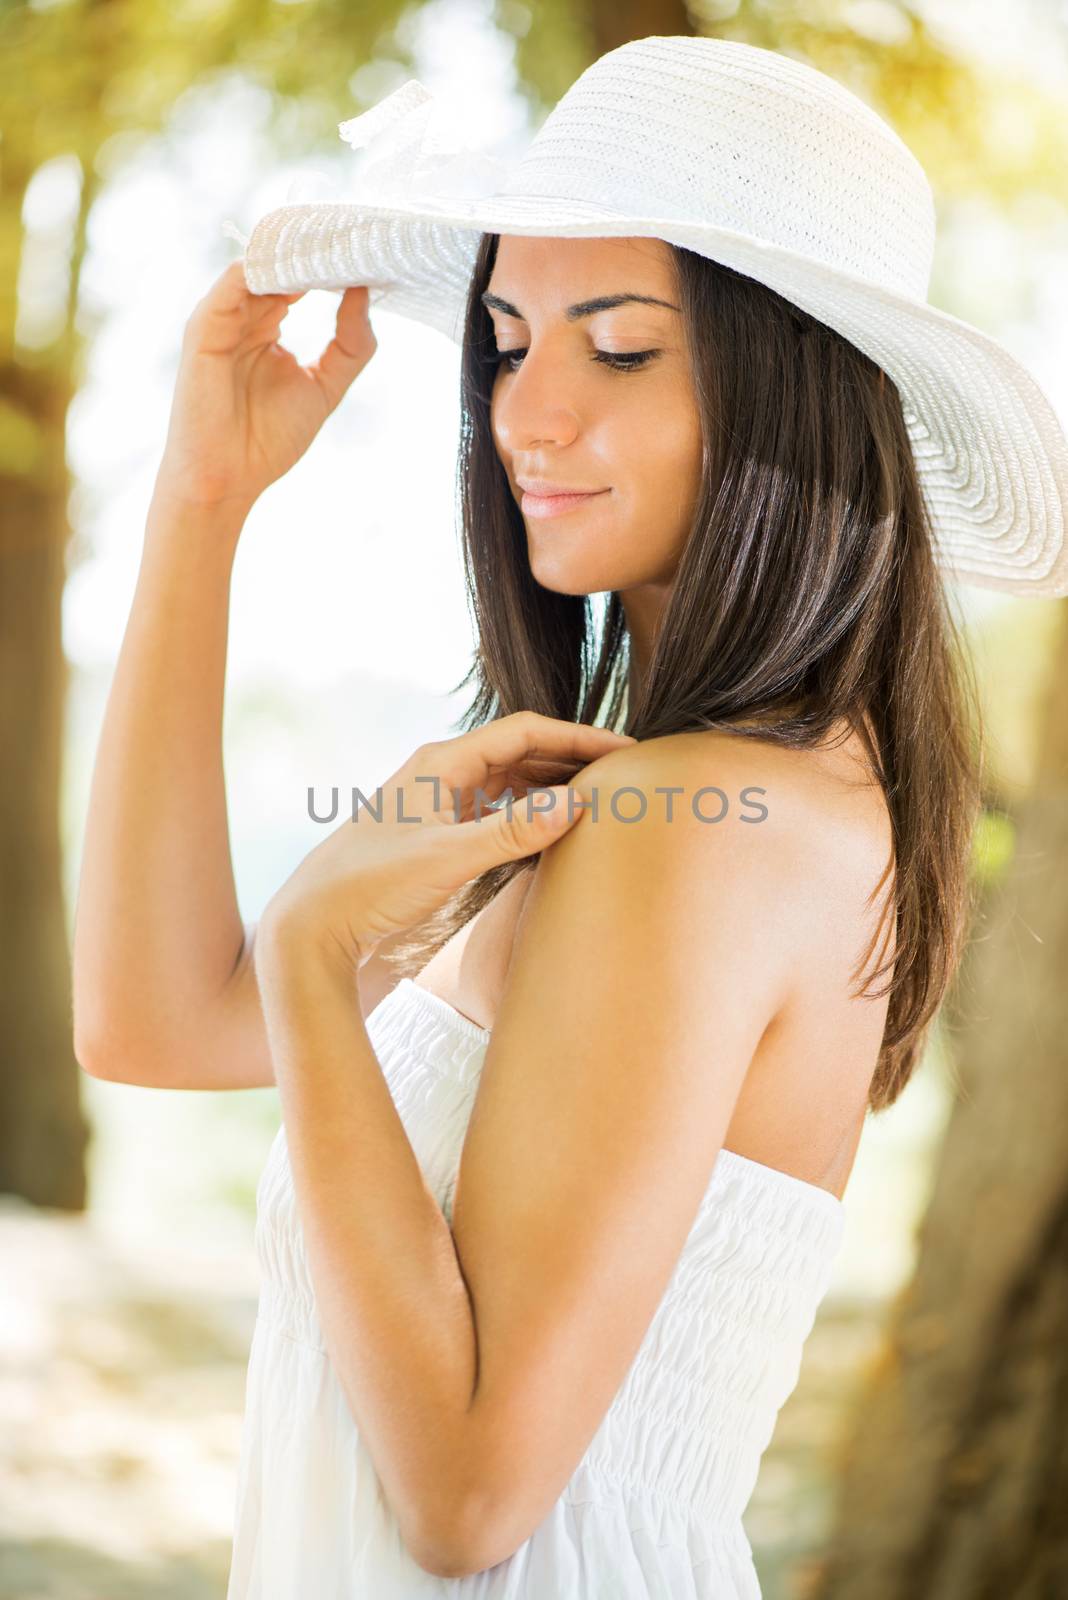 Portrait of young beautiful woman with white sun hat and white dress relaxing in the forest.